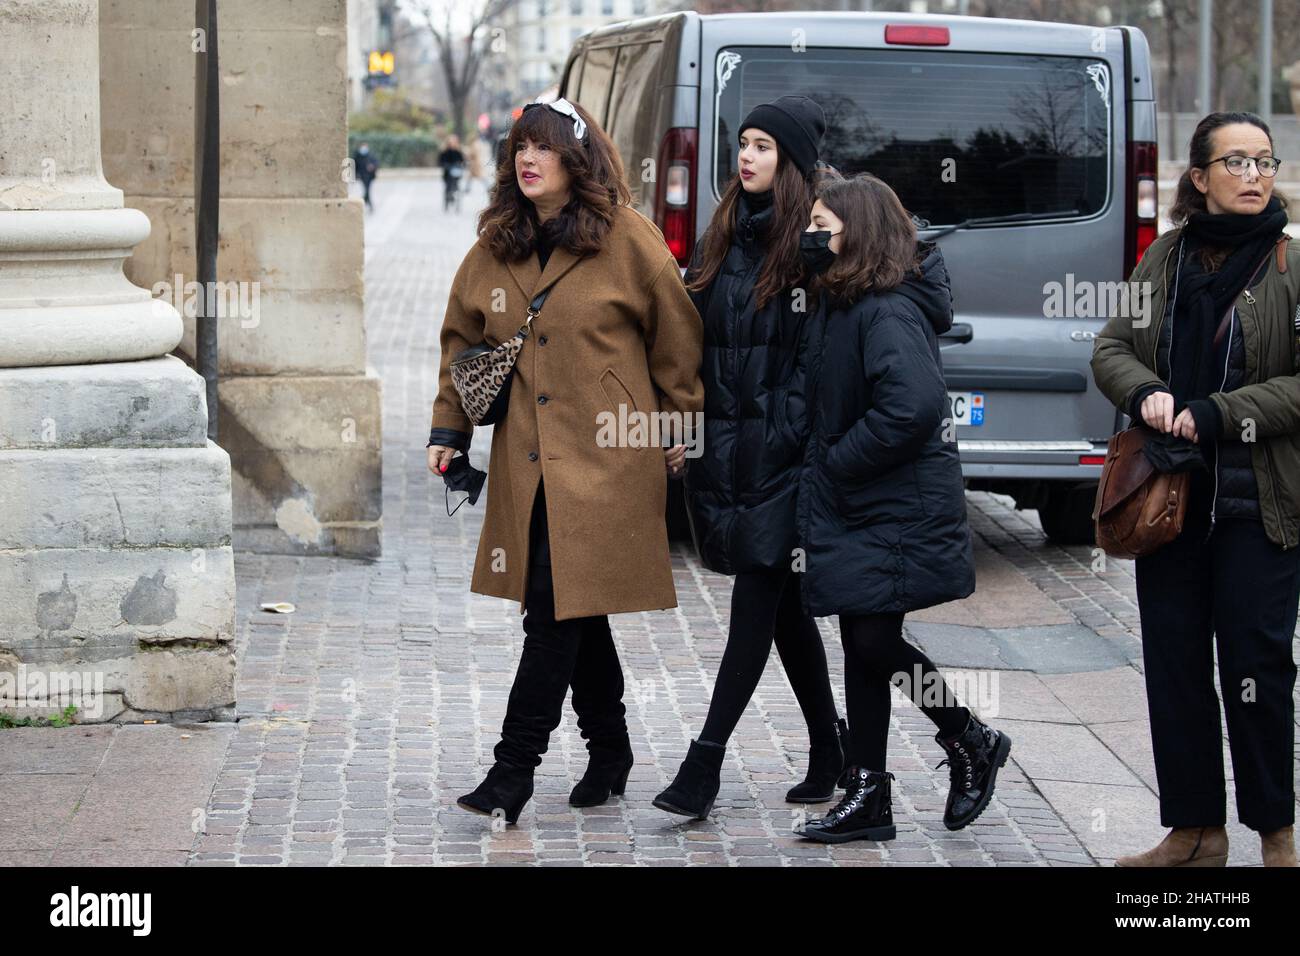 Paris, France, 15/12/2021, Elsa Wolinski and her daugthers during the funeral of Maryse Wolinski at Saint Eustache church in Paris, France on December 15, 2021. Novelist and journalist, Maryse Wolinski, widow of cartoonist Georges Wolinski killed in the attack on Charlie Hebdo, died at the age of 78. Photo by Raphael Lafargue/ABACAPRESS.COM Stock Photo